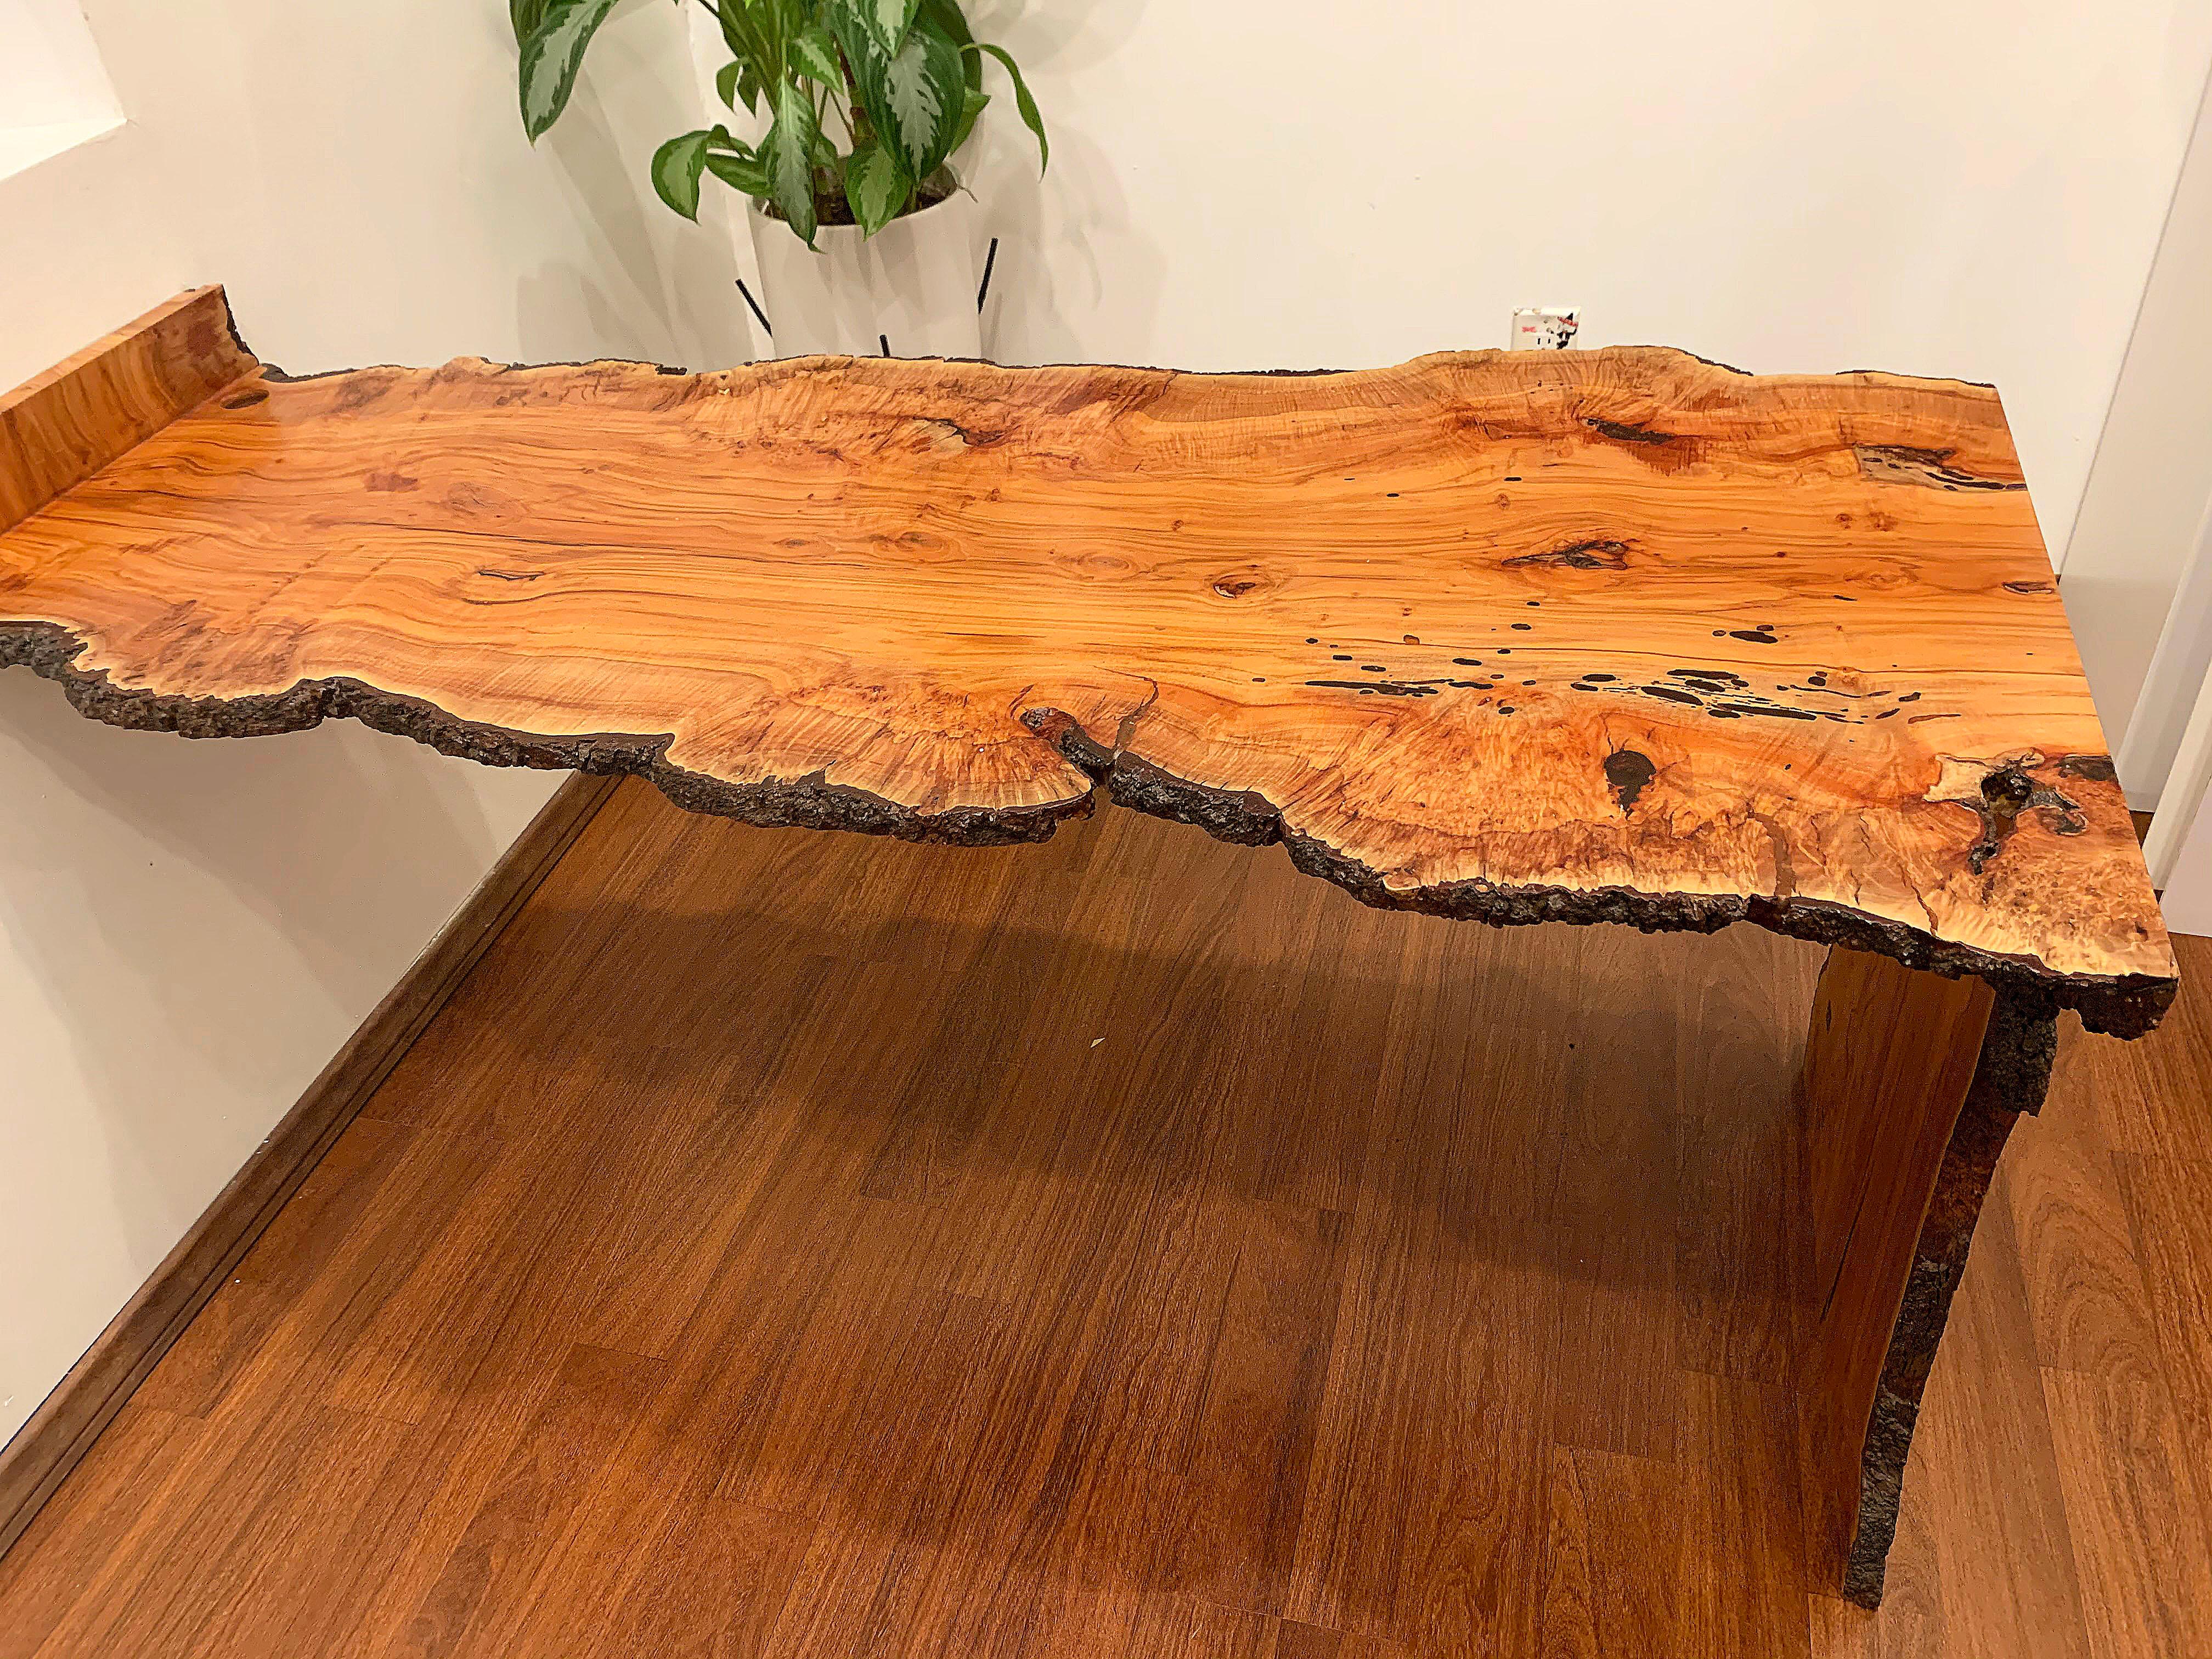 Burl wood live edge waterfall desk by San Diego designer. Although it isn't heavy, the desk should be suspended with wall anchors or other reinforcement.

Waterfall 29 inches
Width of desk at waterfall 24.5 inches
Width of desk at middle is 23.5